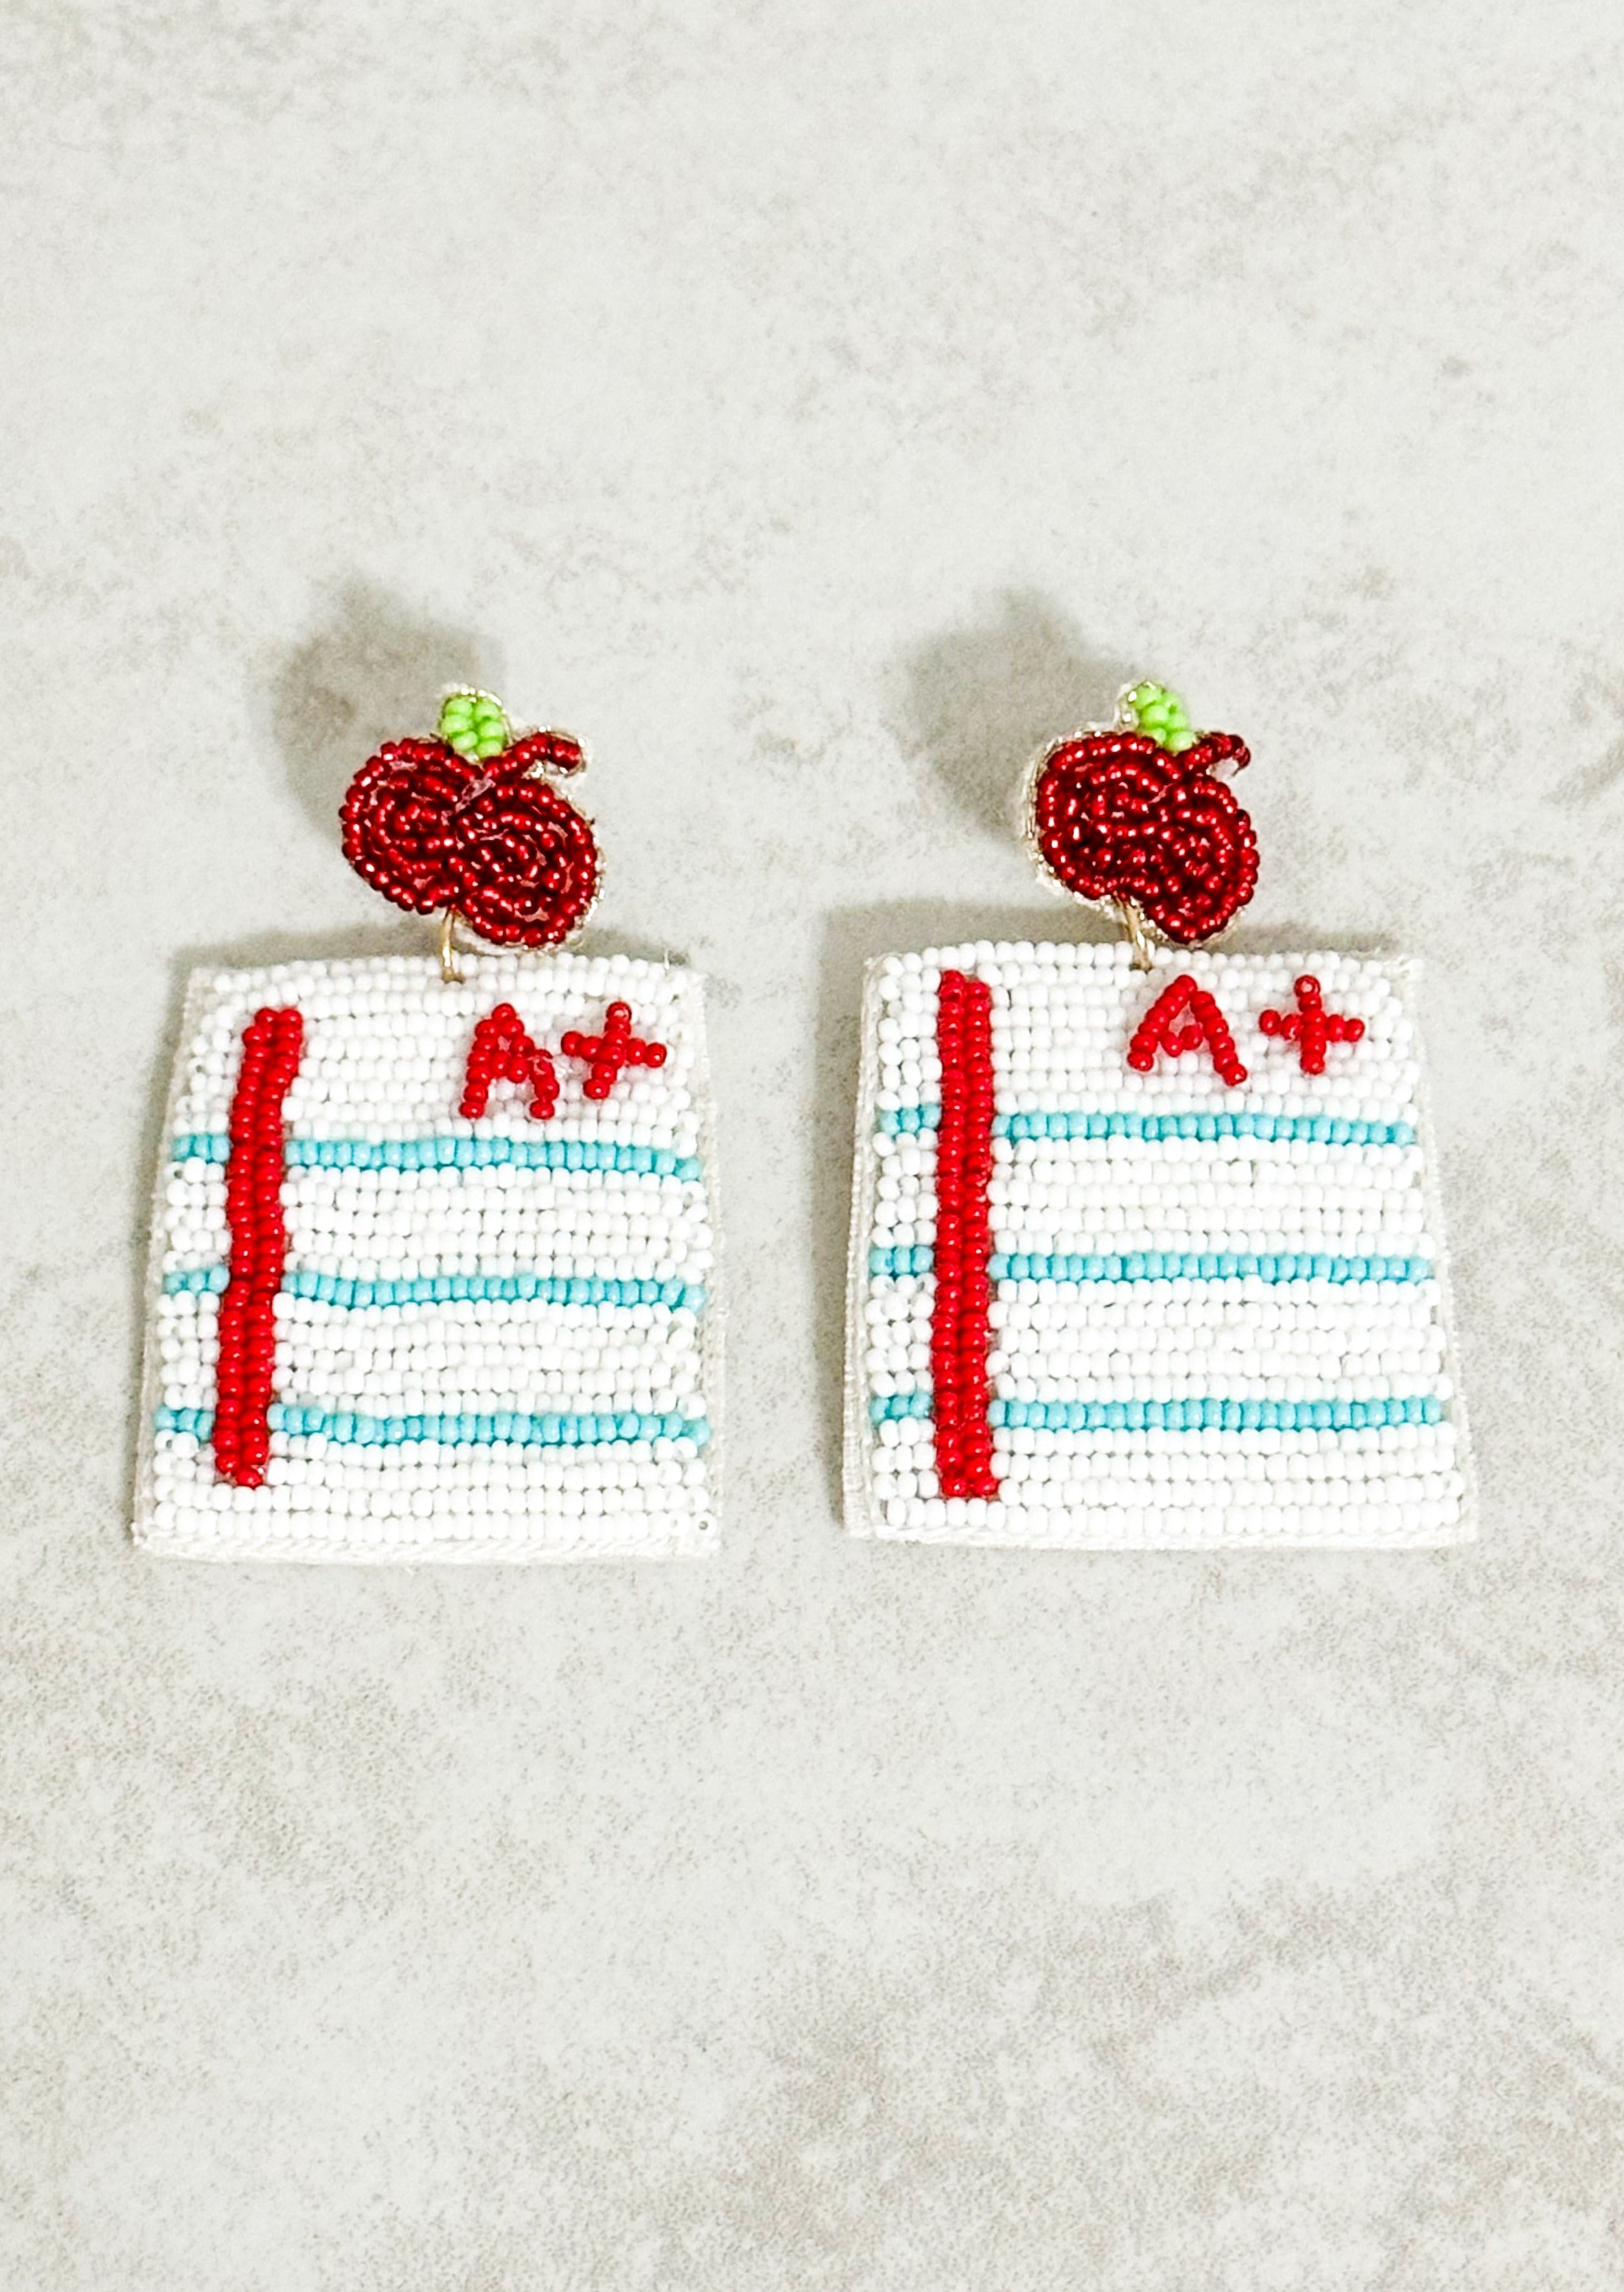 Seed bead earrings that look like a sheet of paper with a red A plus on the top right corner and hanging from a red beaded apple - post back